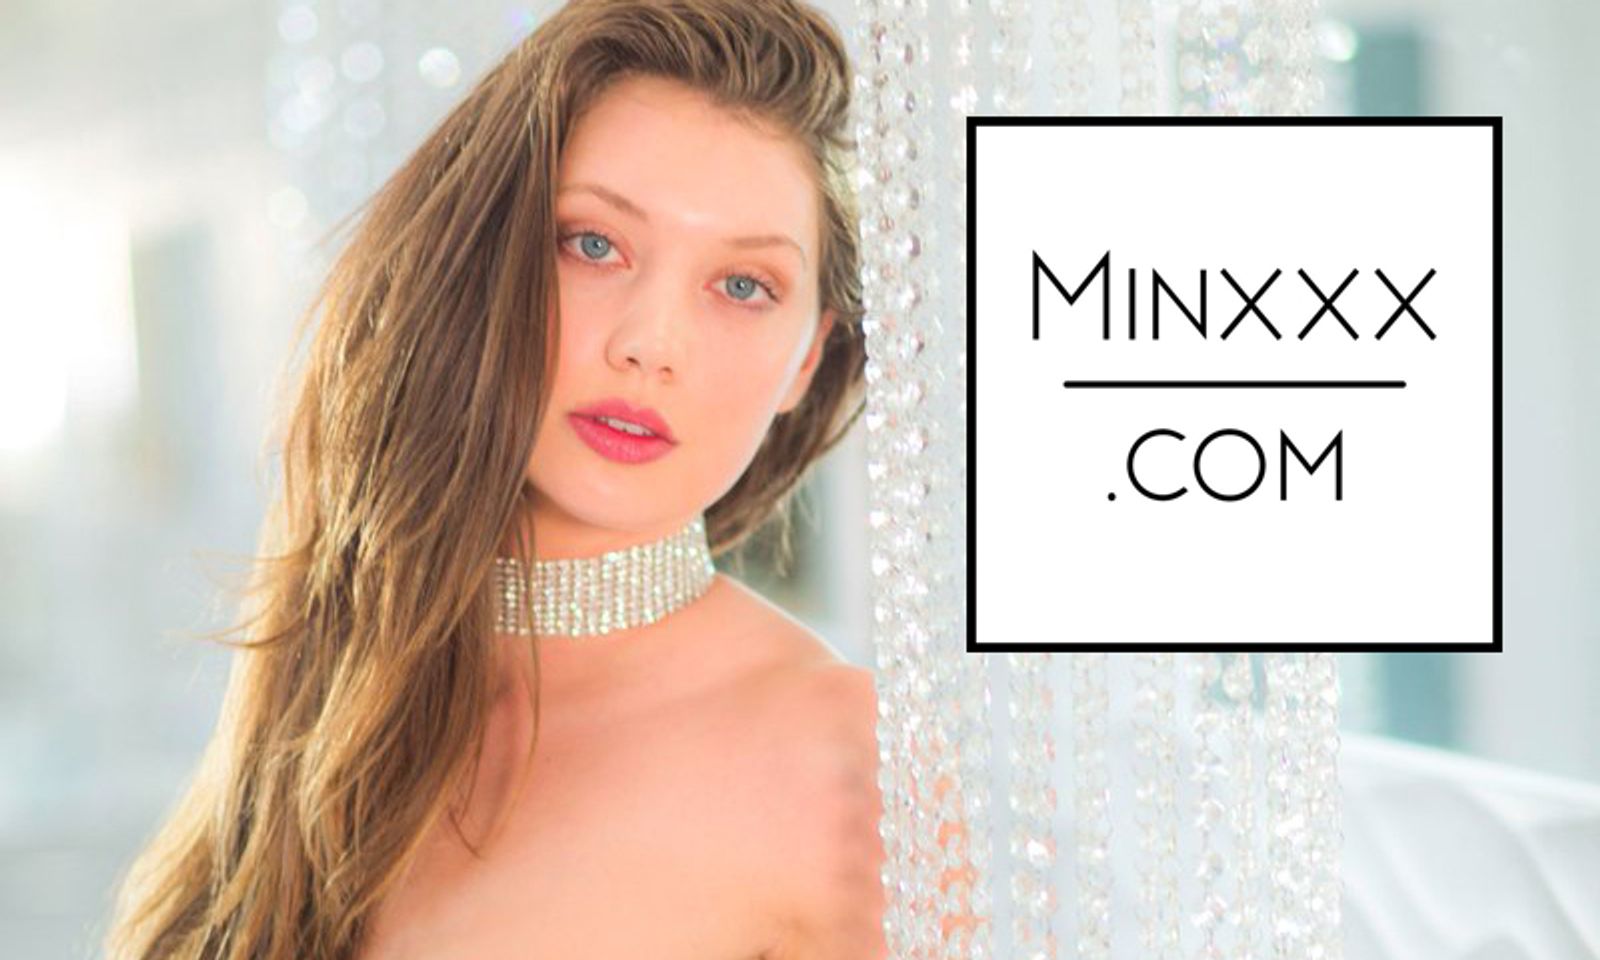 Minxxx.com Officially Launches